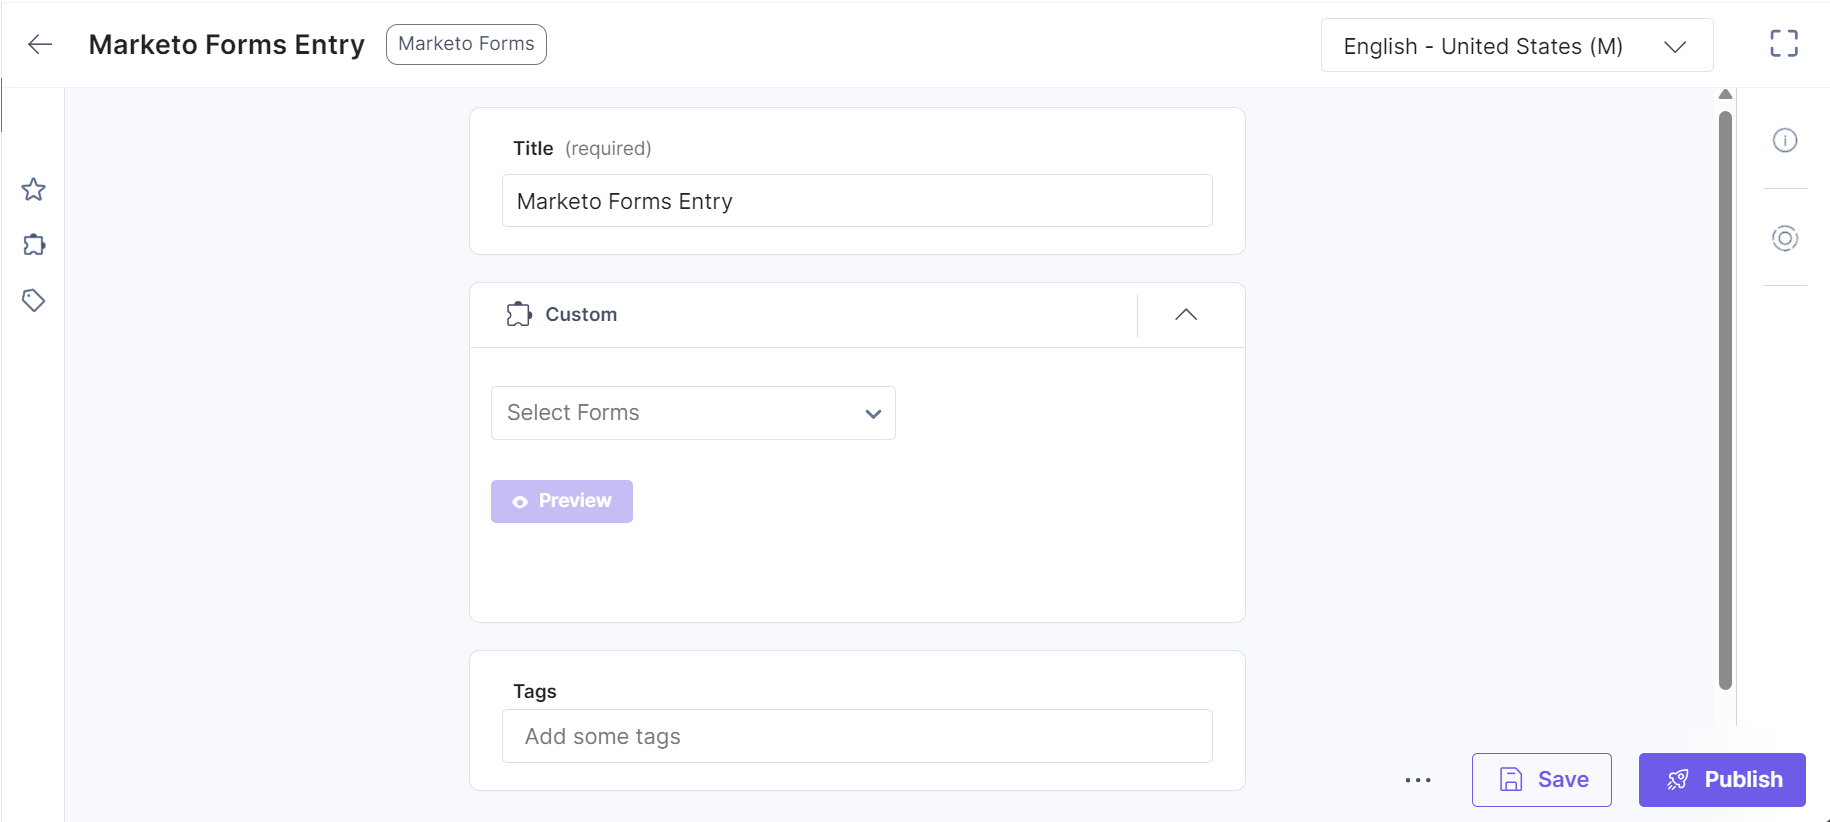 4_Marketo_Forms_Entry.png